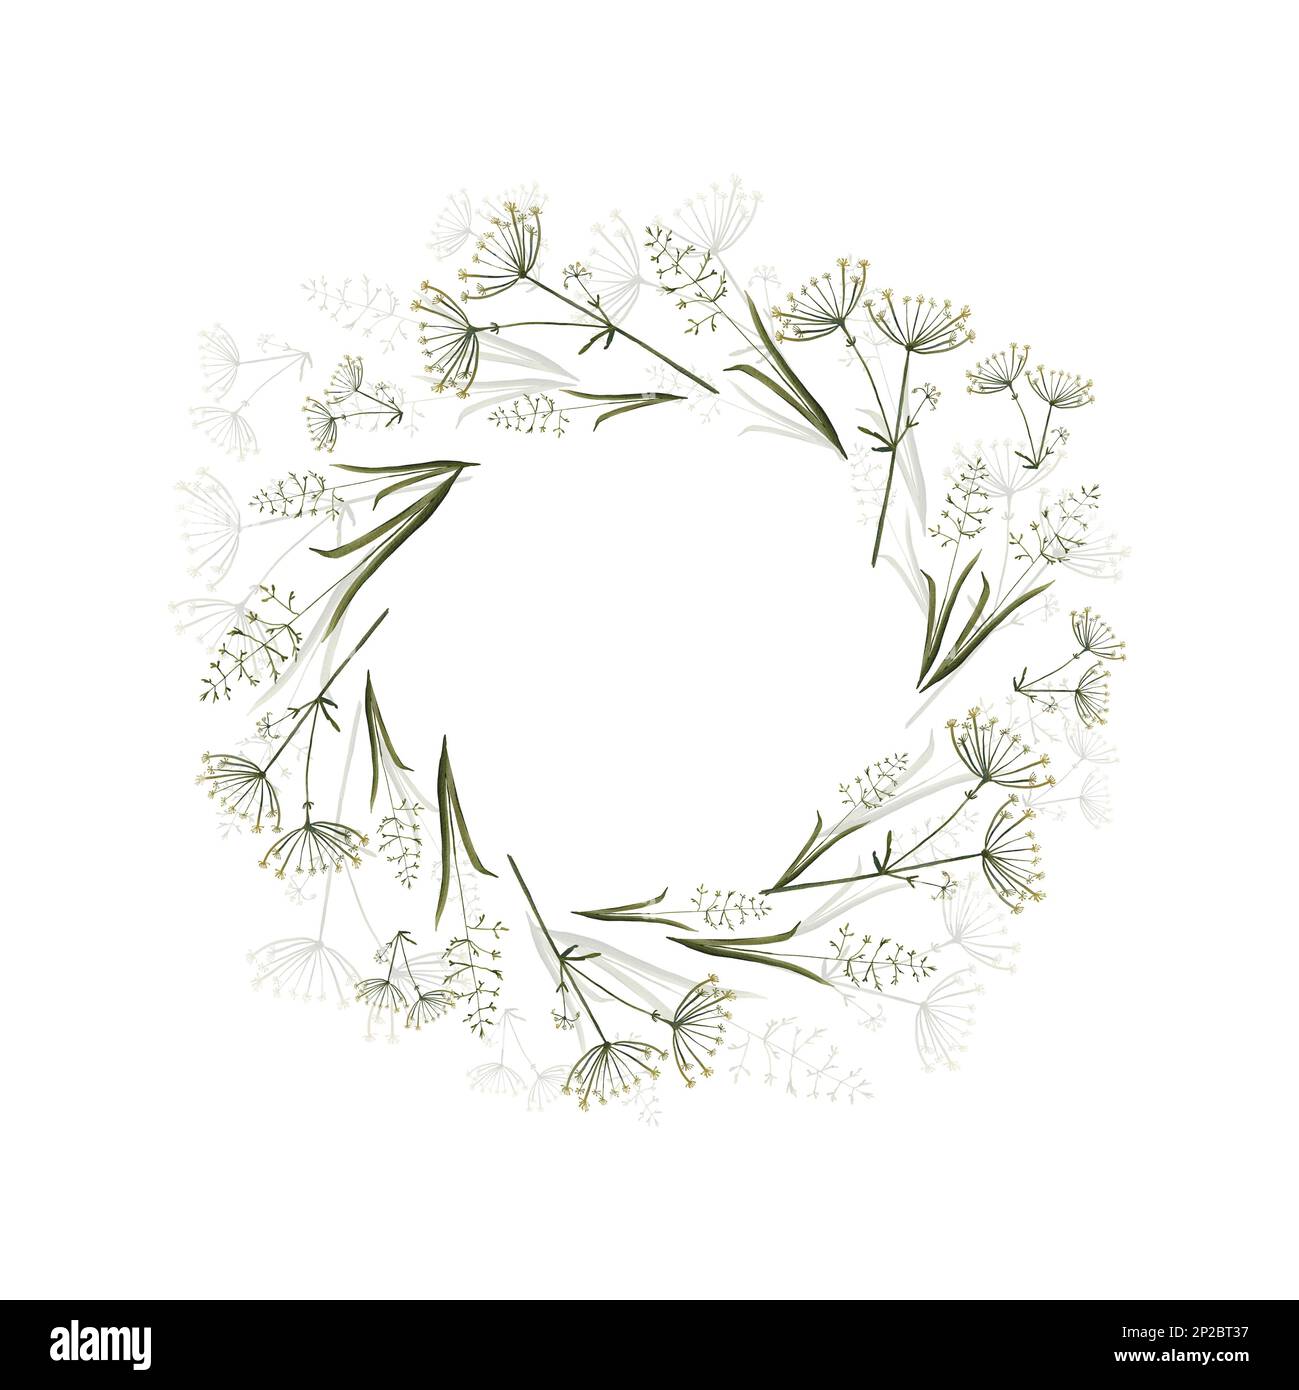 Round frame of field plants isolated on a white background. Watercolor illustration of meadow grasses. A meadow flower.Medicinal herbs. The drawing is Stock Photo